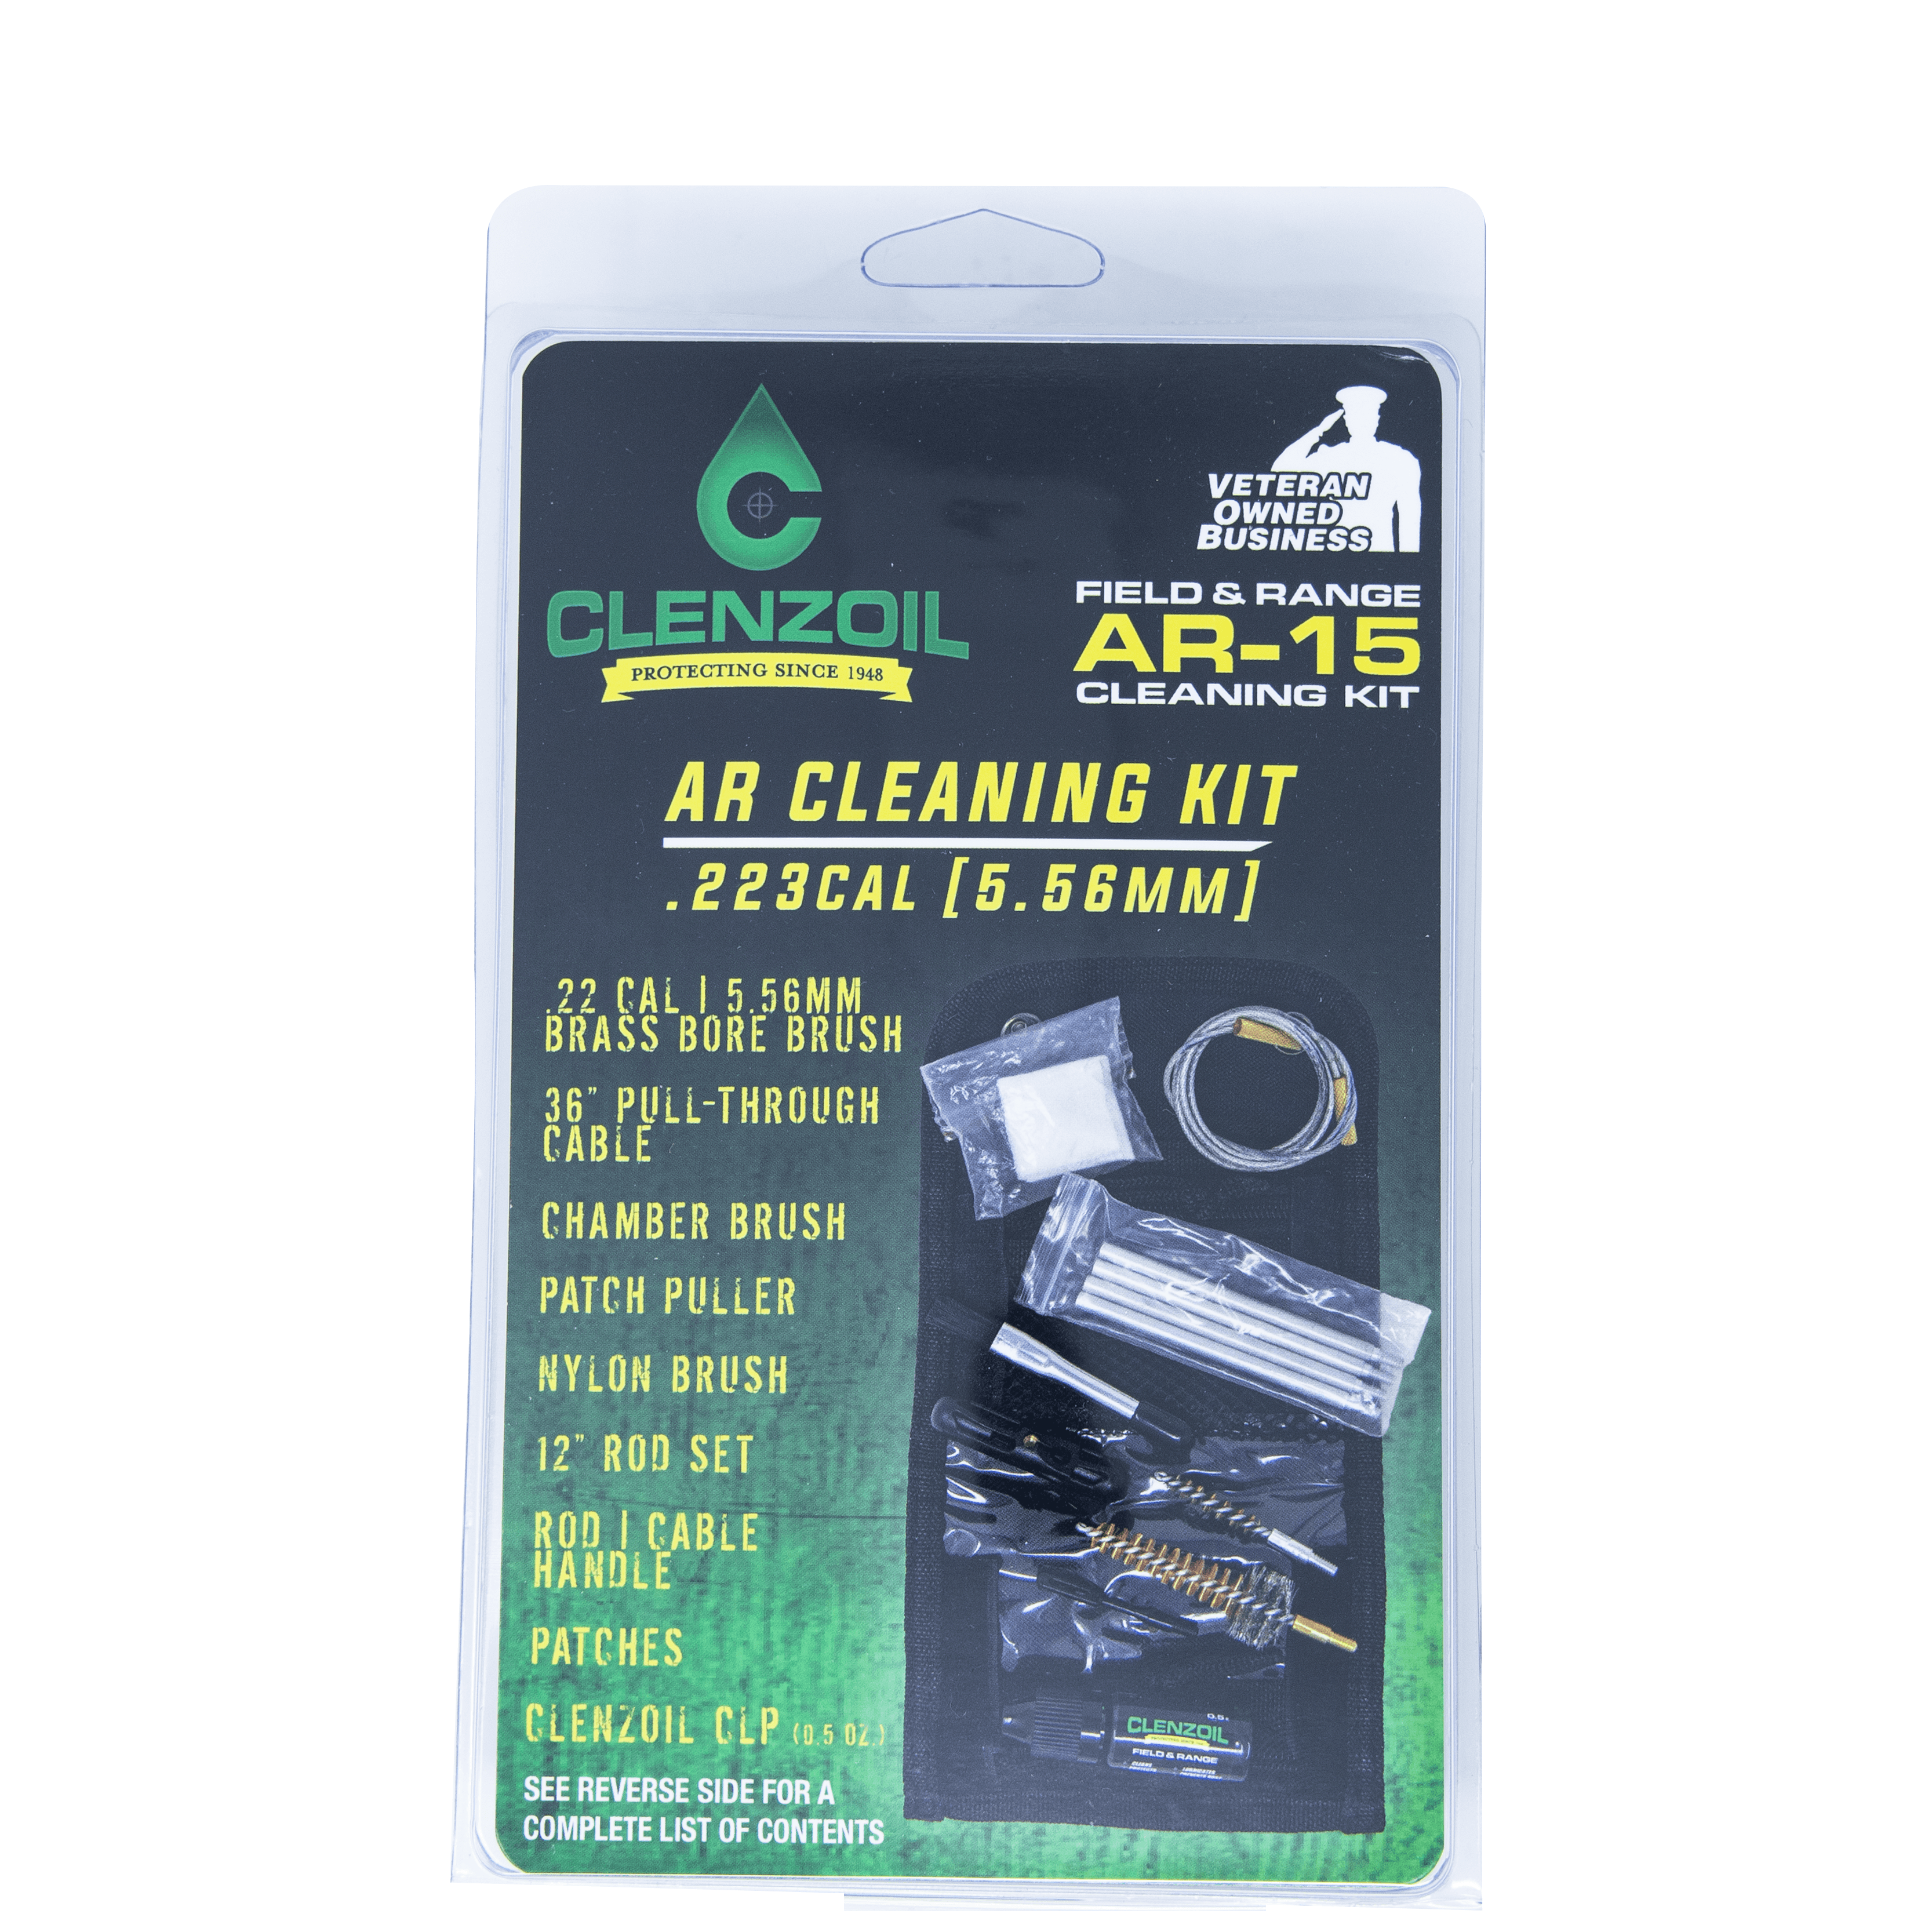 AR-15 Cleaning Kit (.22 Cal | 5.56 MM) - Clenzoil